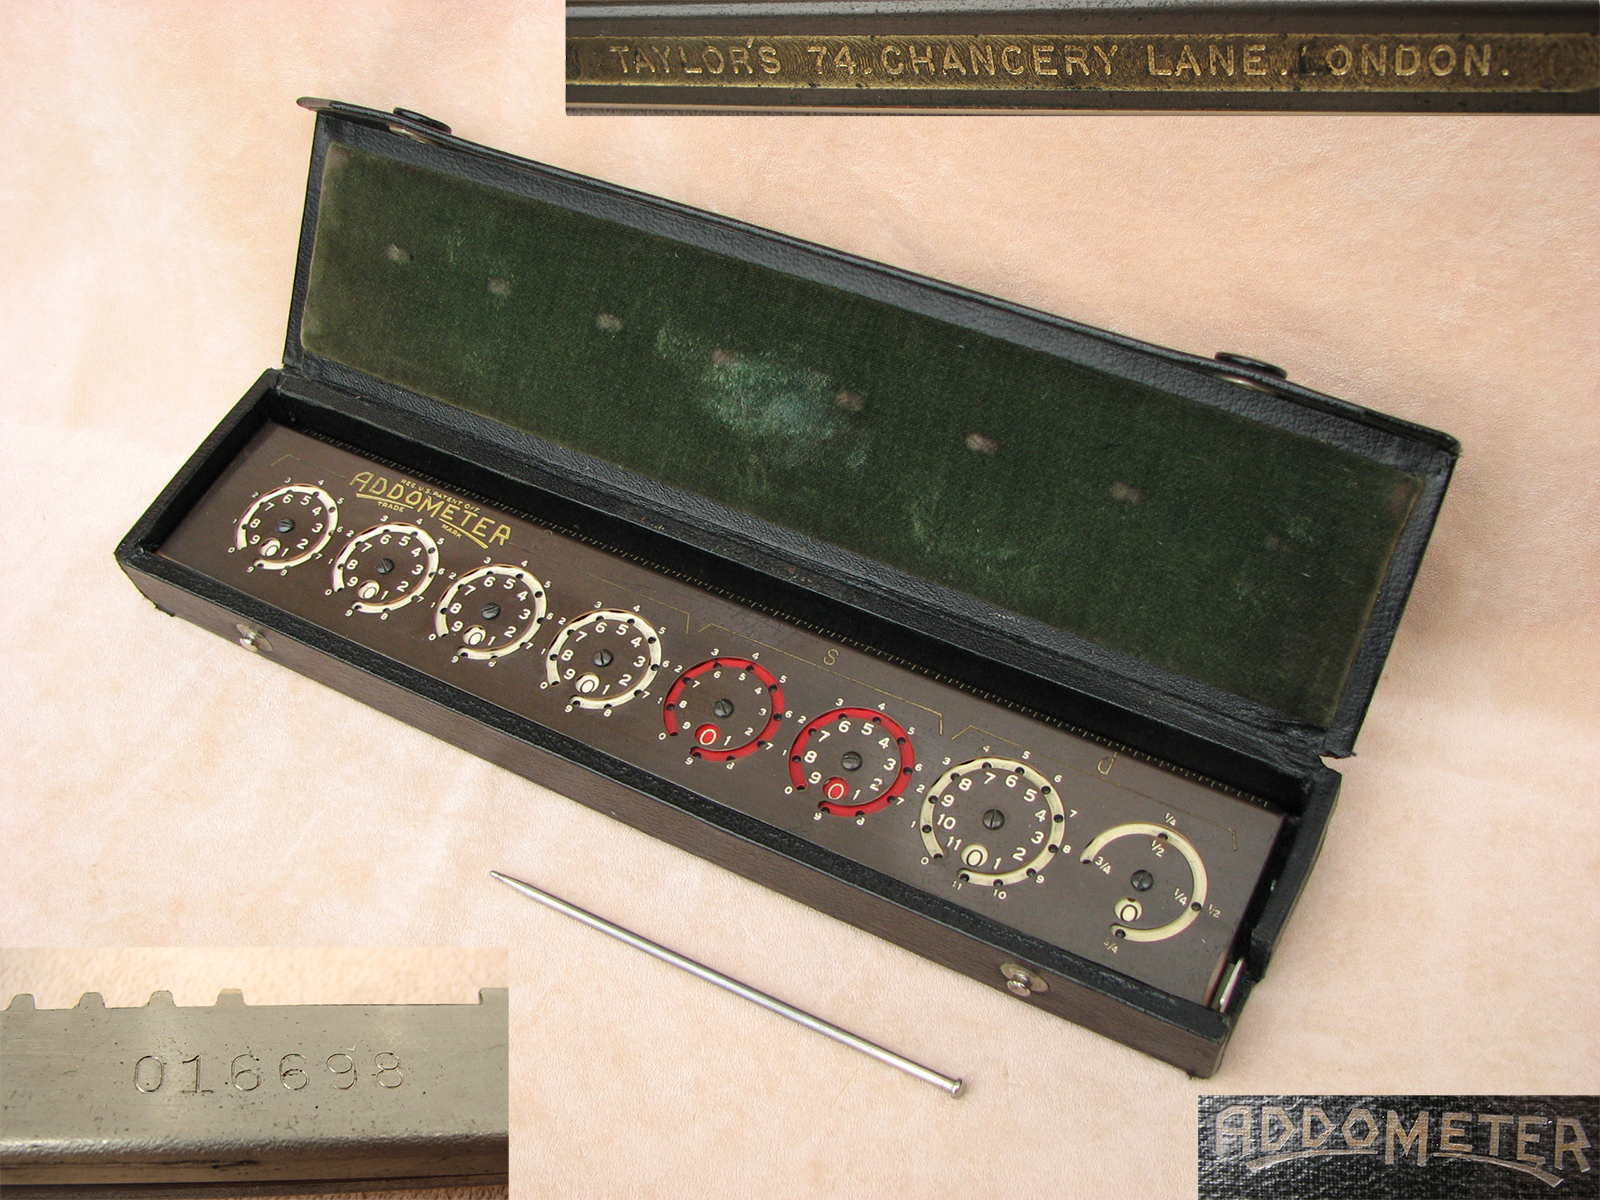 1950's ADDOMETER sterling calculator retailed by Taylors Chancery Lane, London